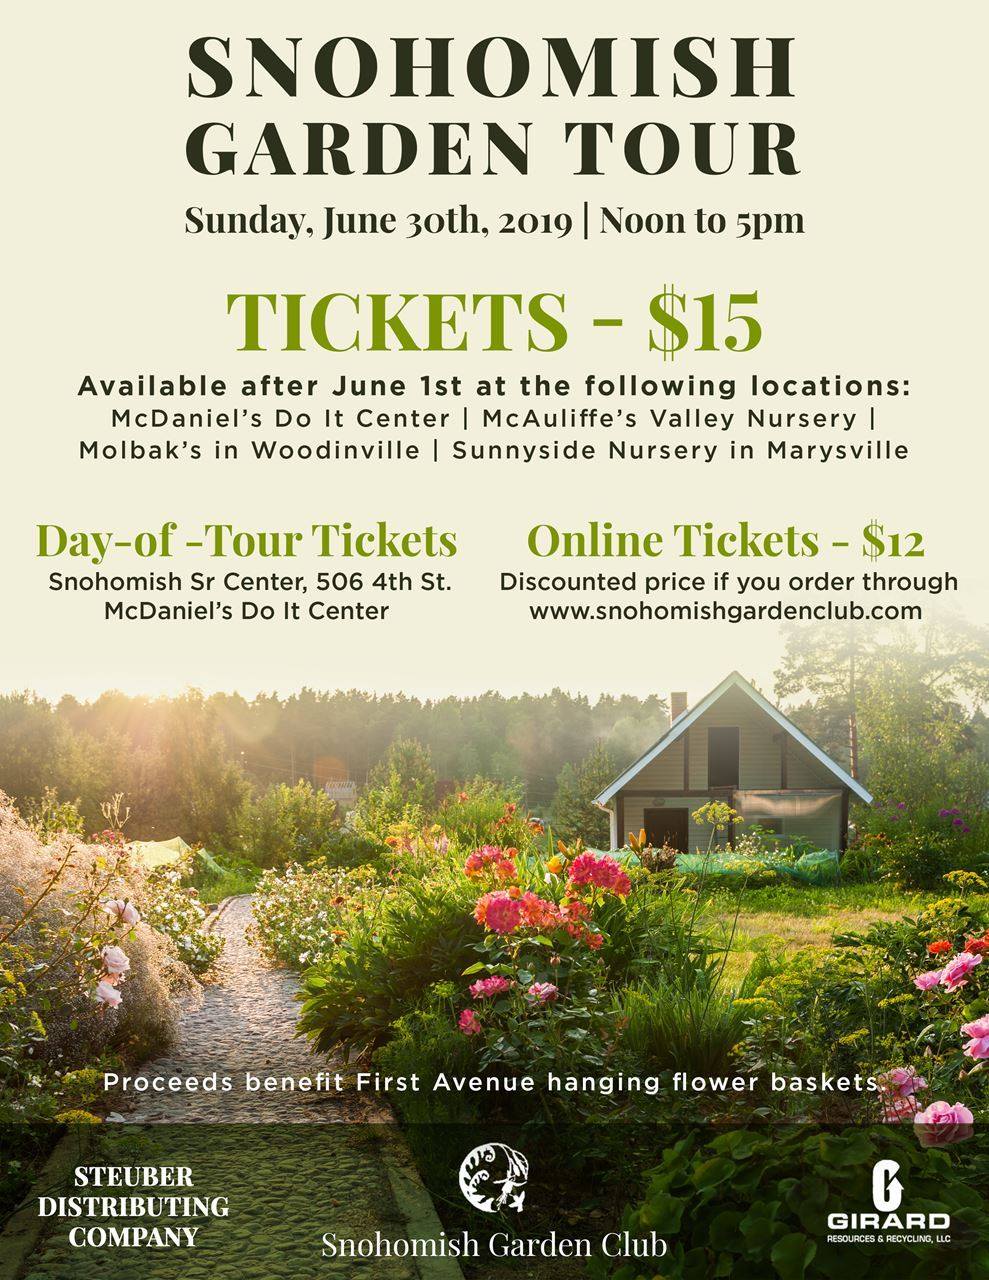 Your Guide To The Snohomish Garden Tour Your Snohomish County